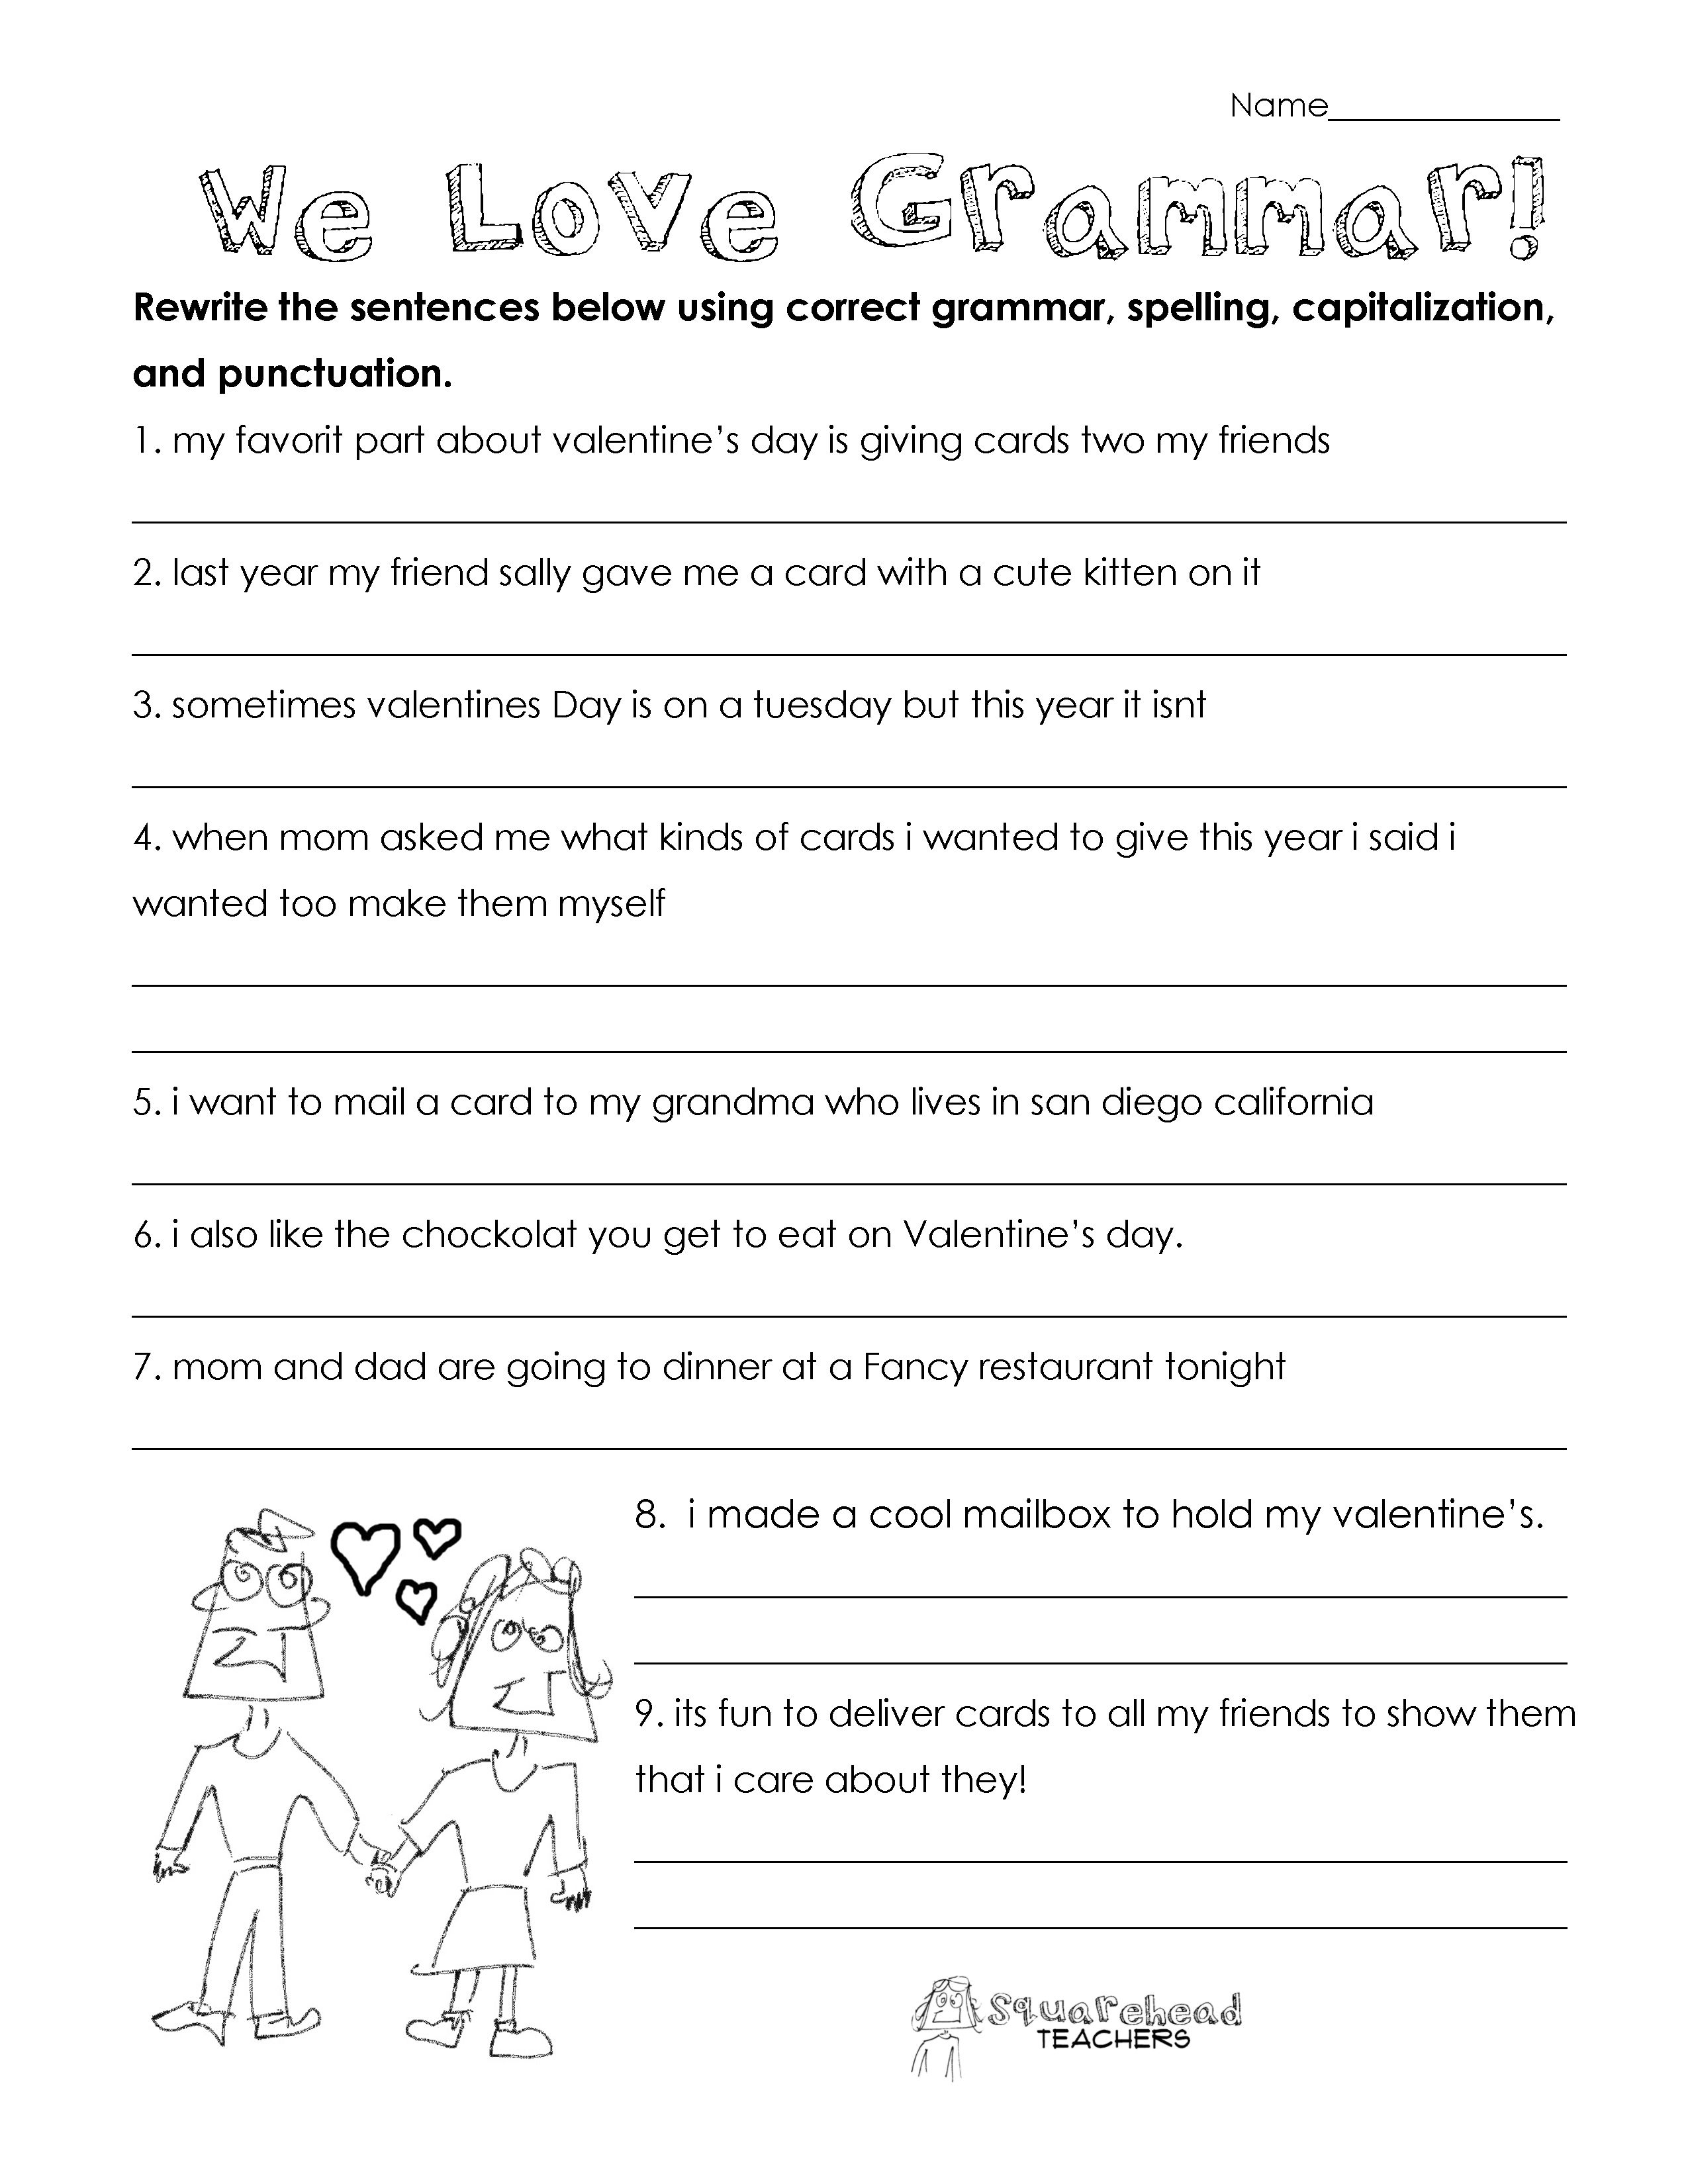 This Grammar Practice Worksheet Seems A Bit Too Tough For The - Free Printable Grammar Worksheets For Highschool Students